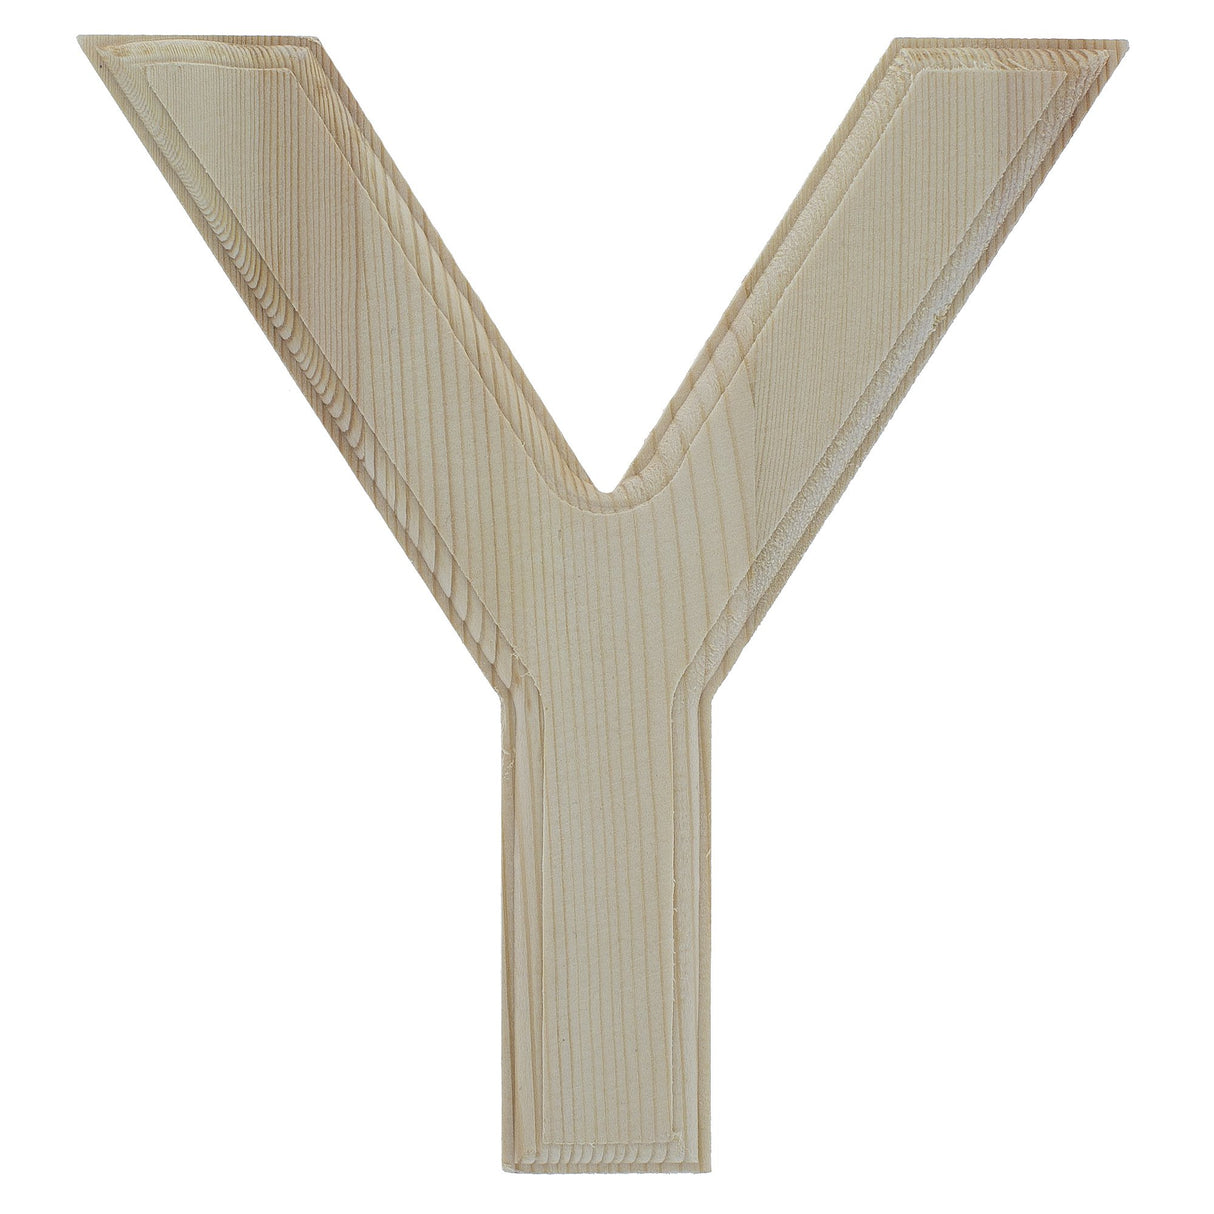 Wood Unfinished Wooden Arial Font Letter Y (6.25 Inches) in Beige color